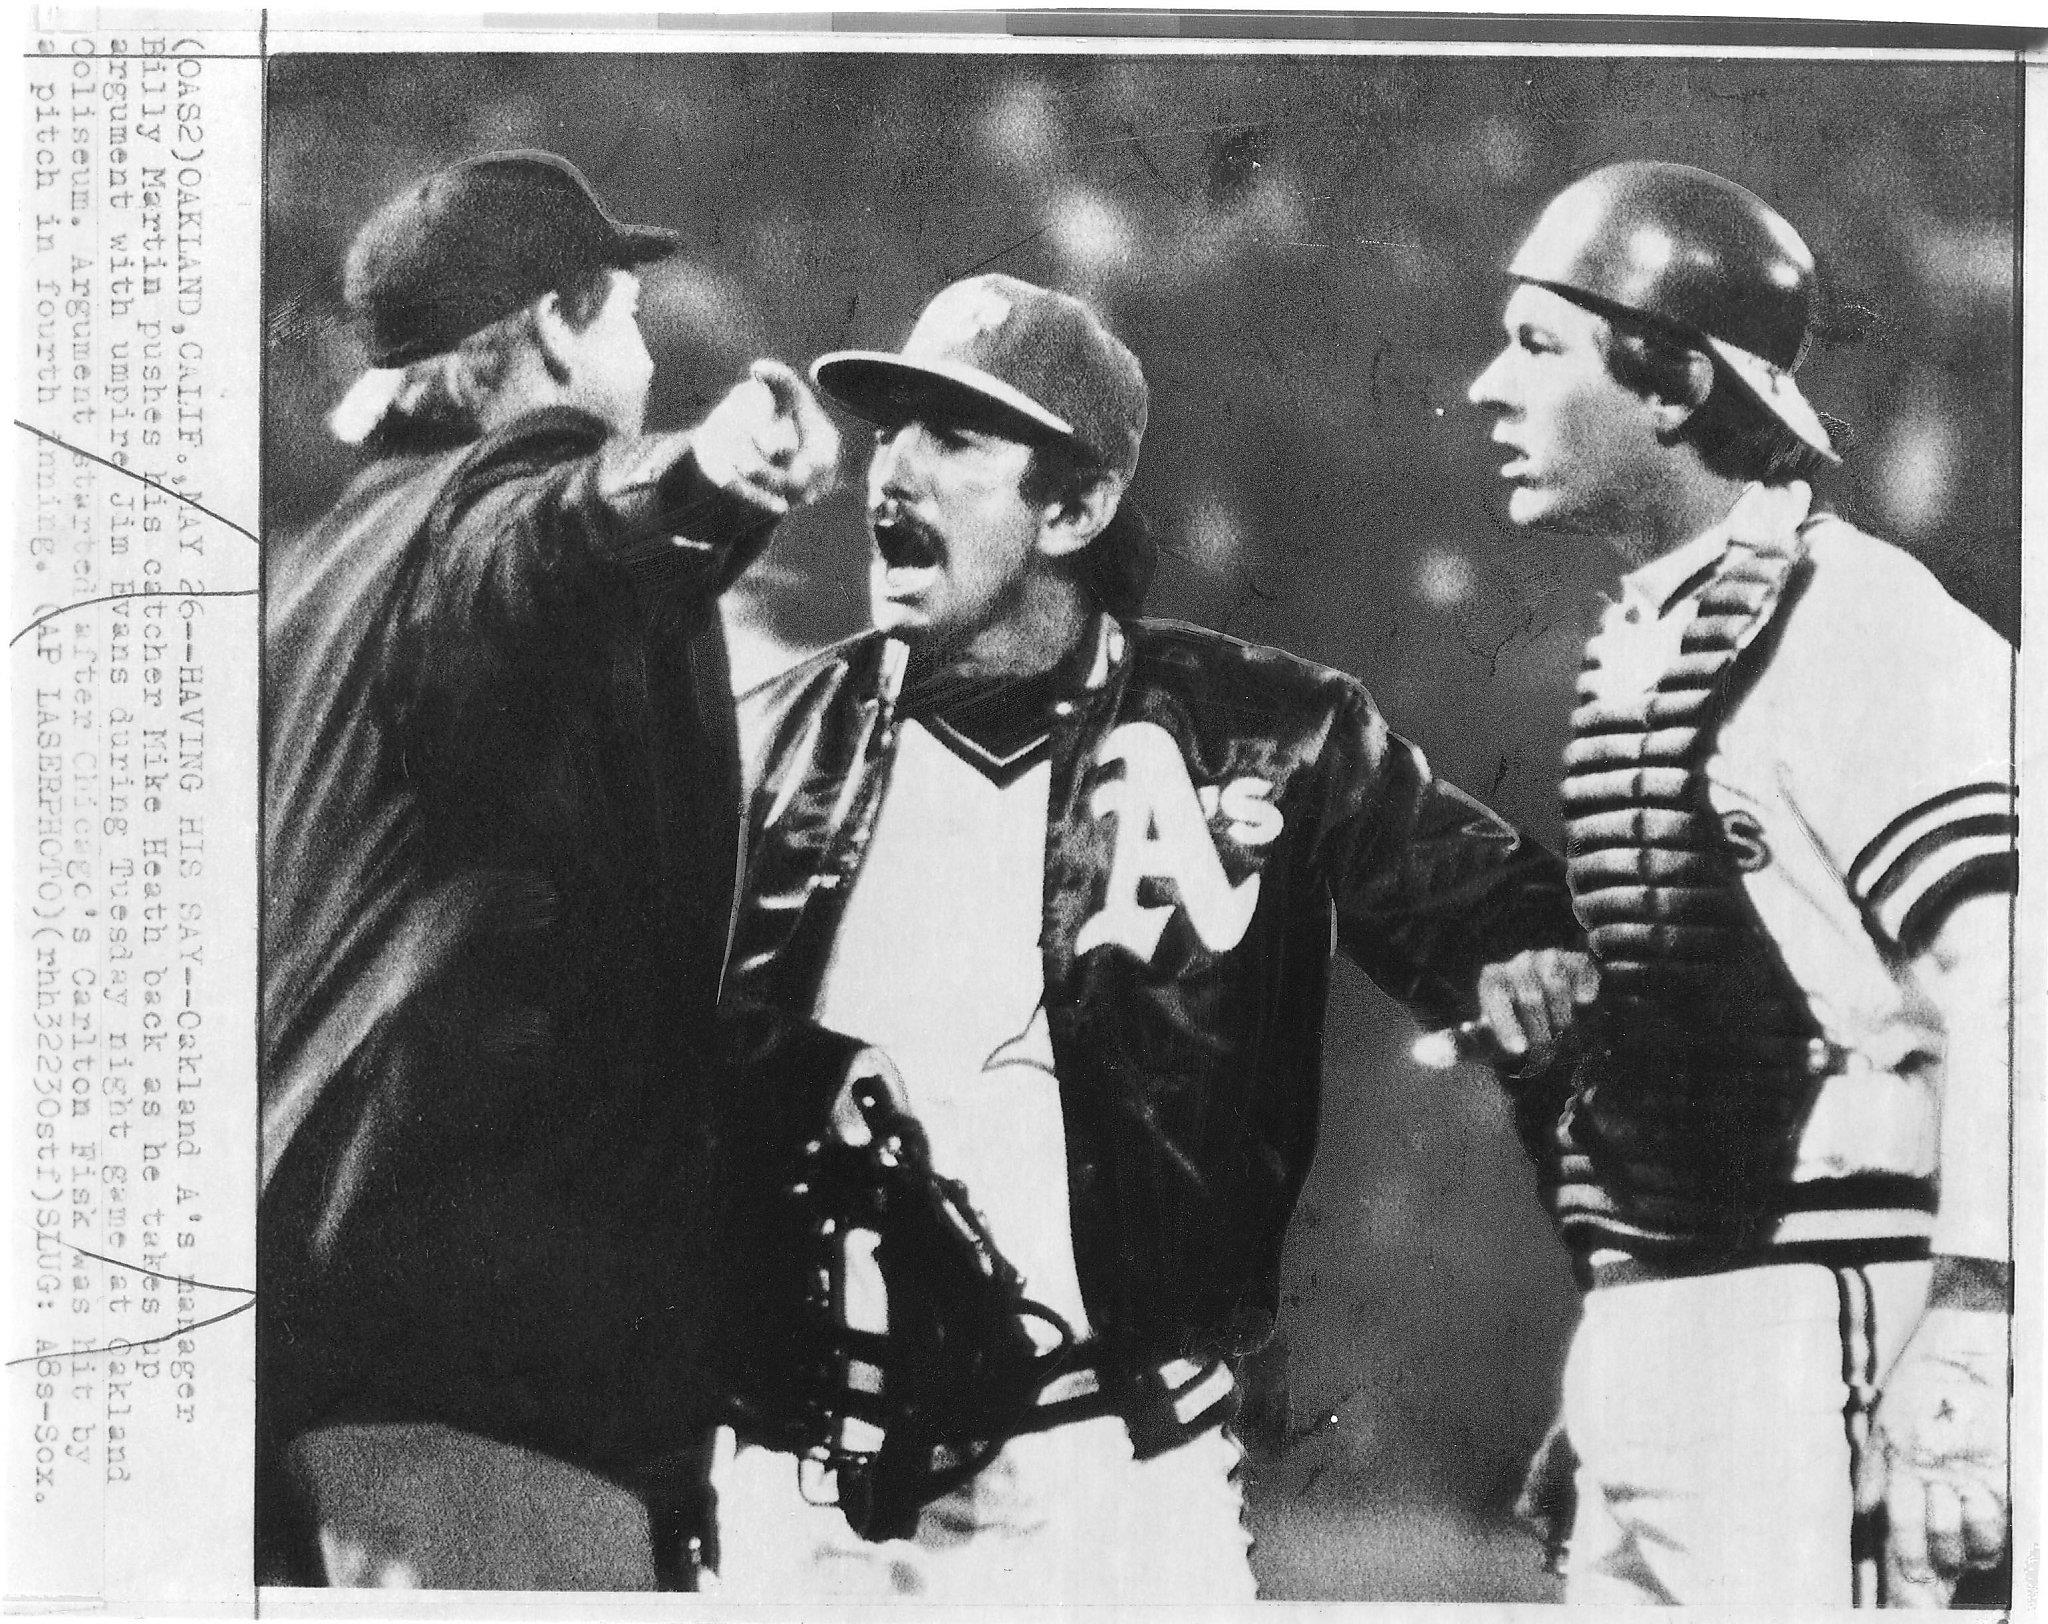 Former A's manager Billy Martin subject of documentary